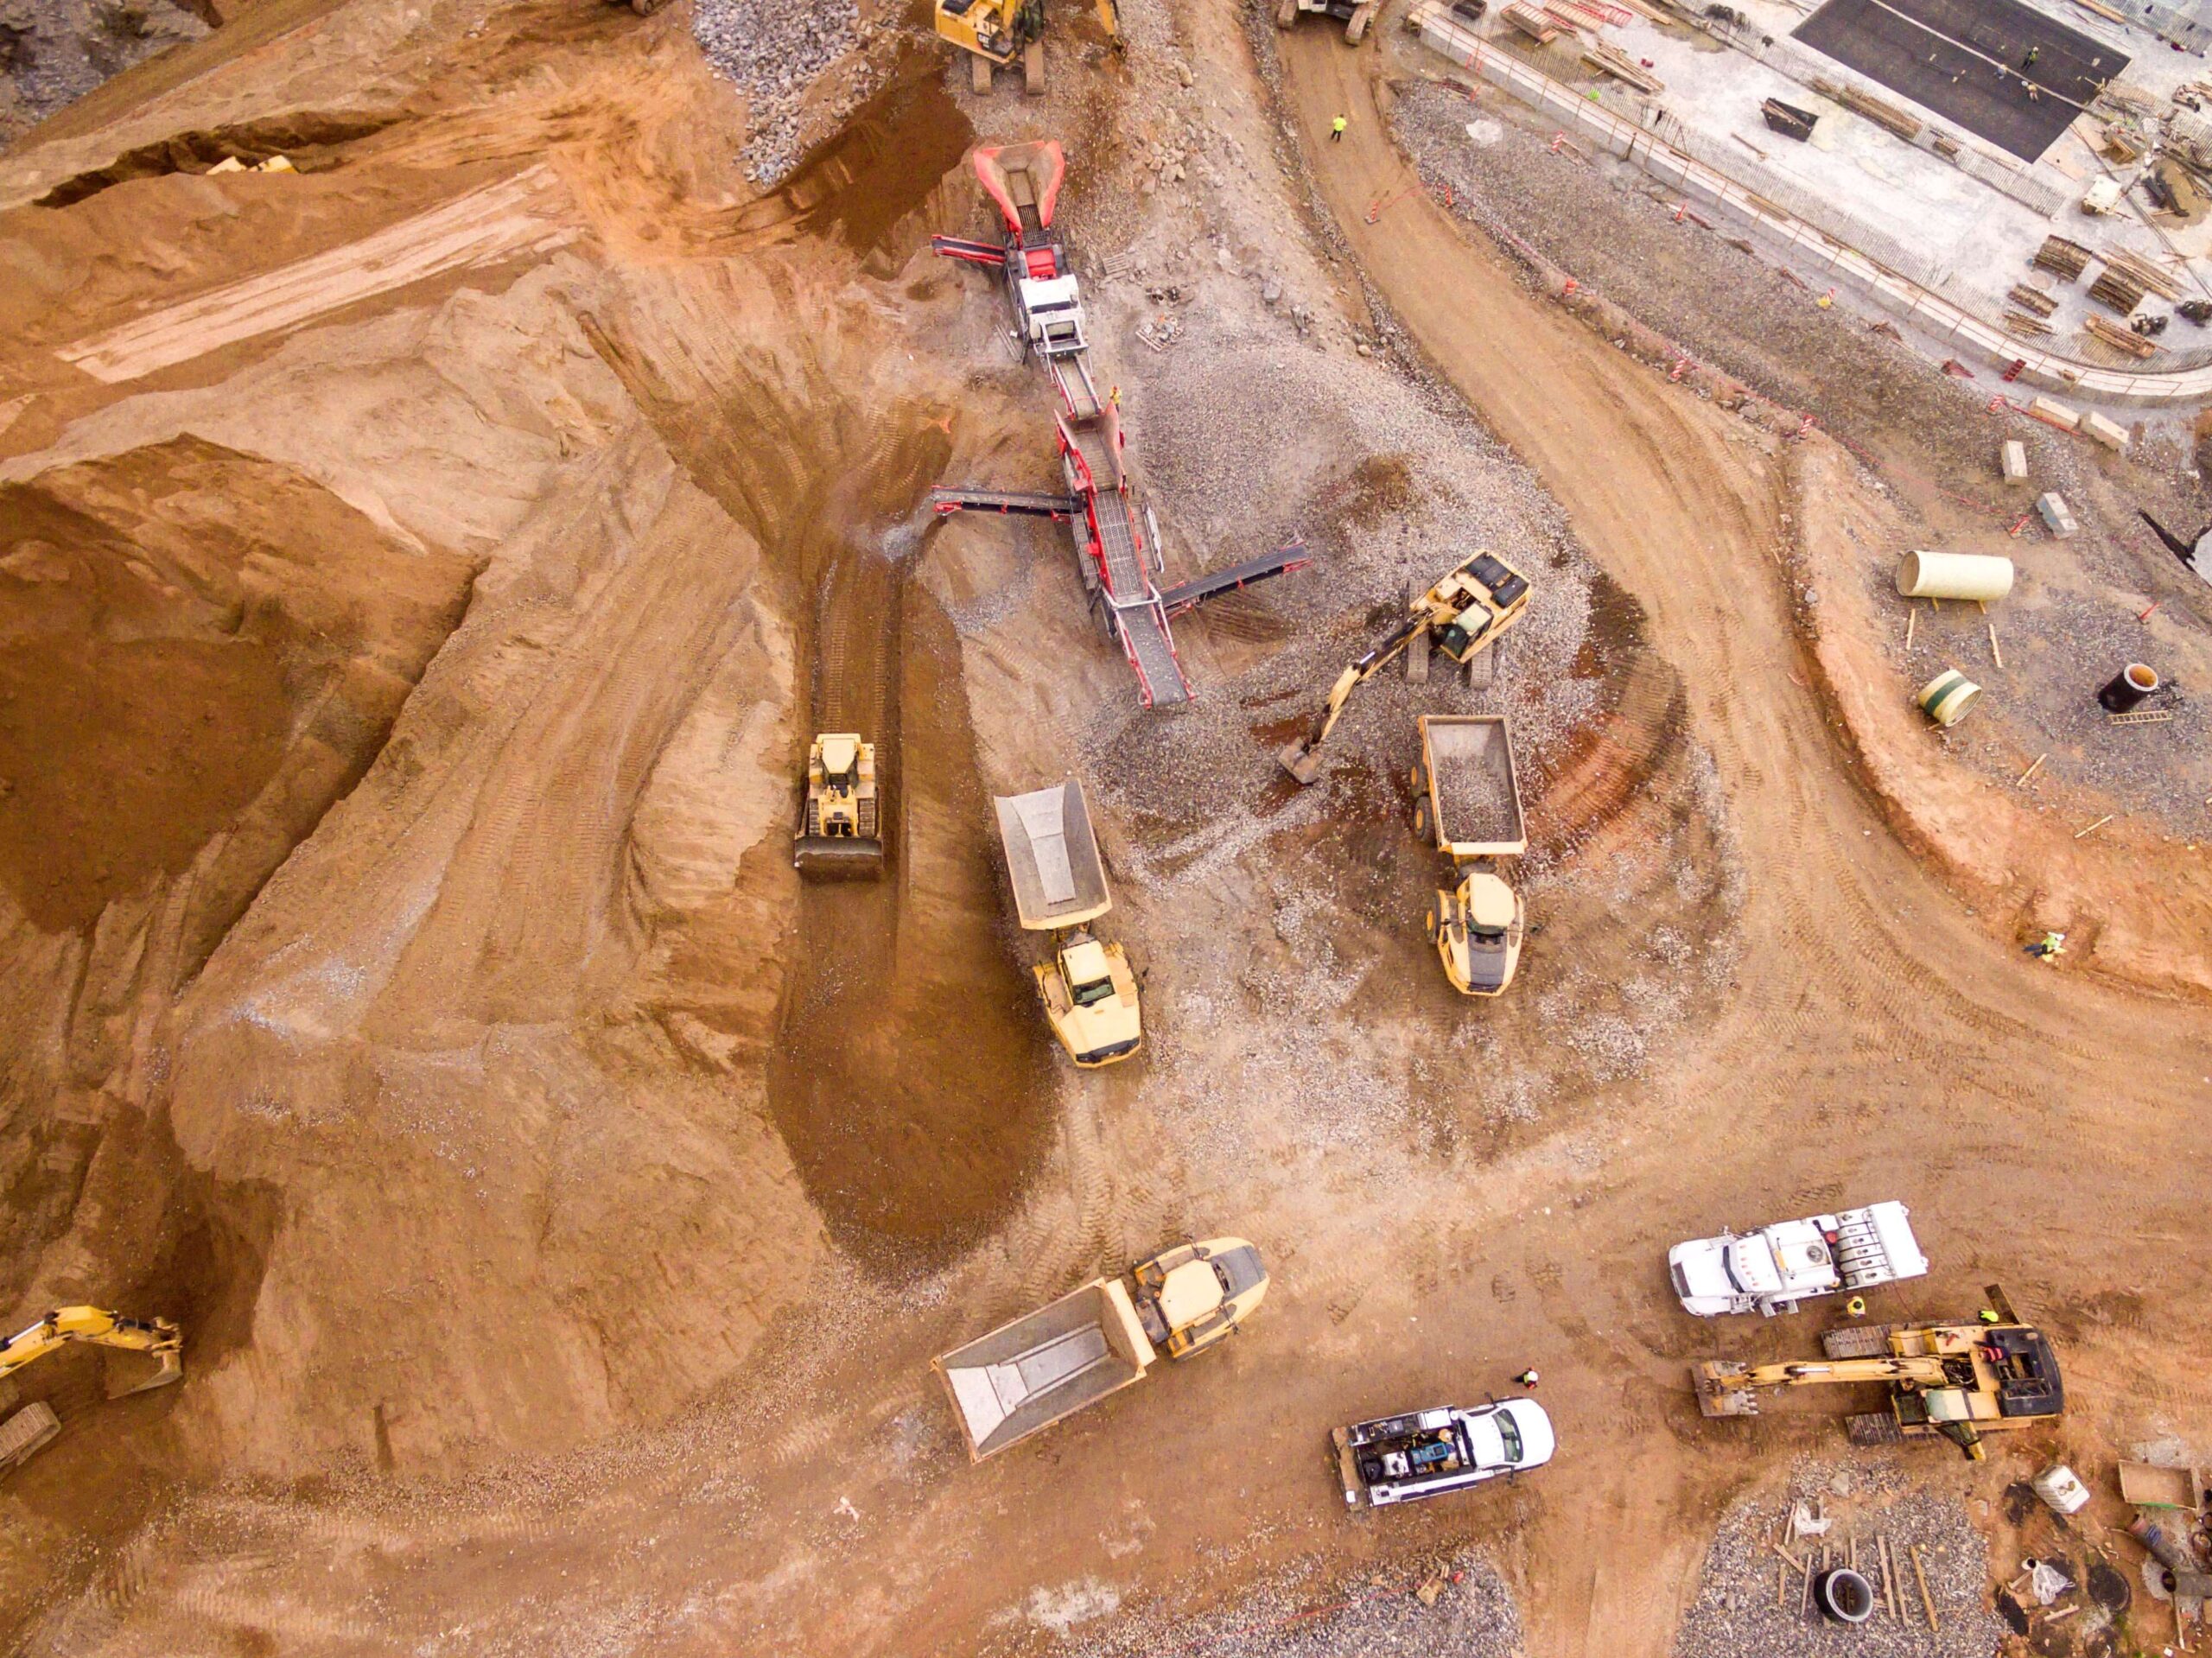 Mine Image with Trucks and Earth Movers - Bird Eye view